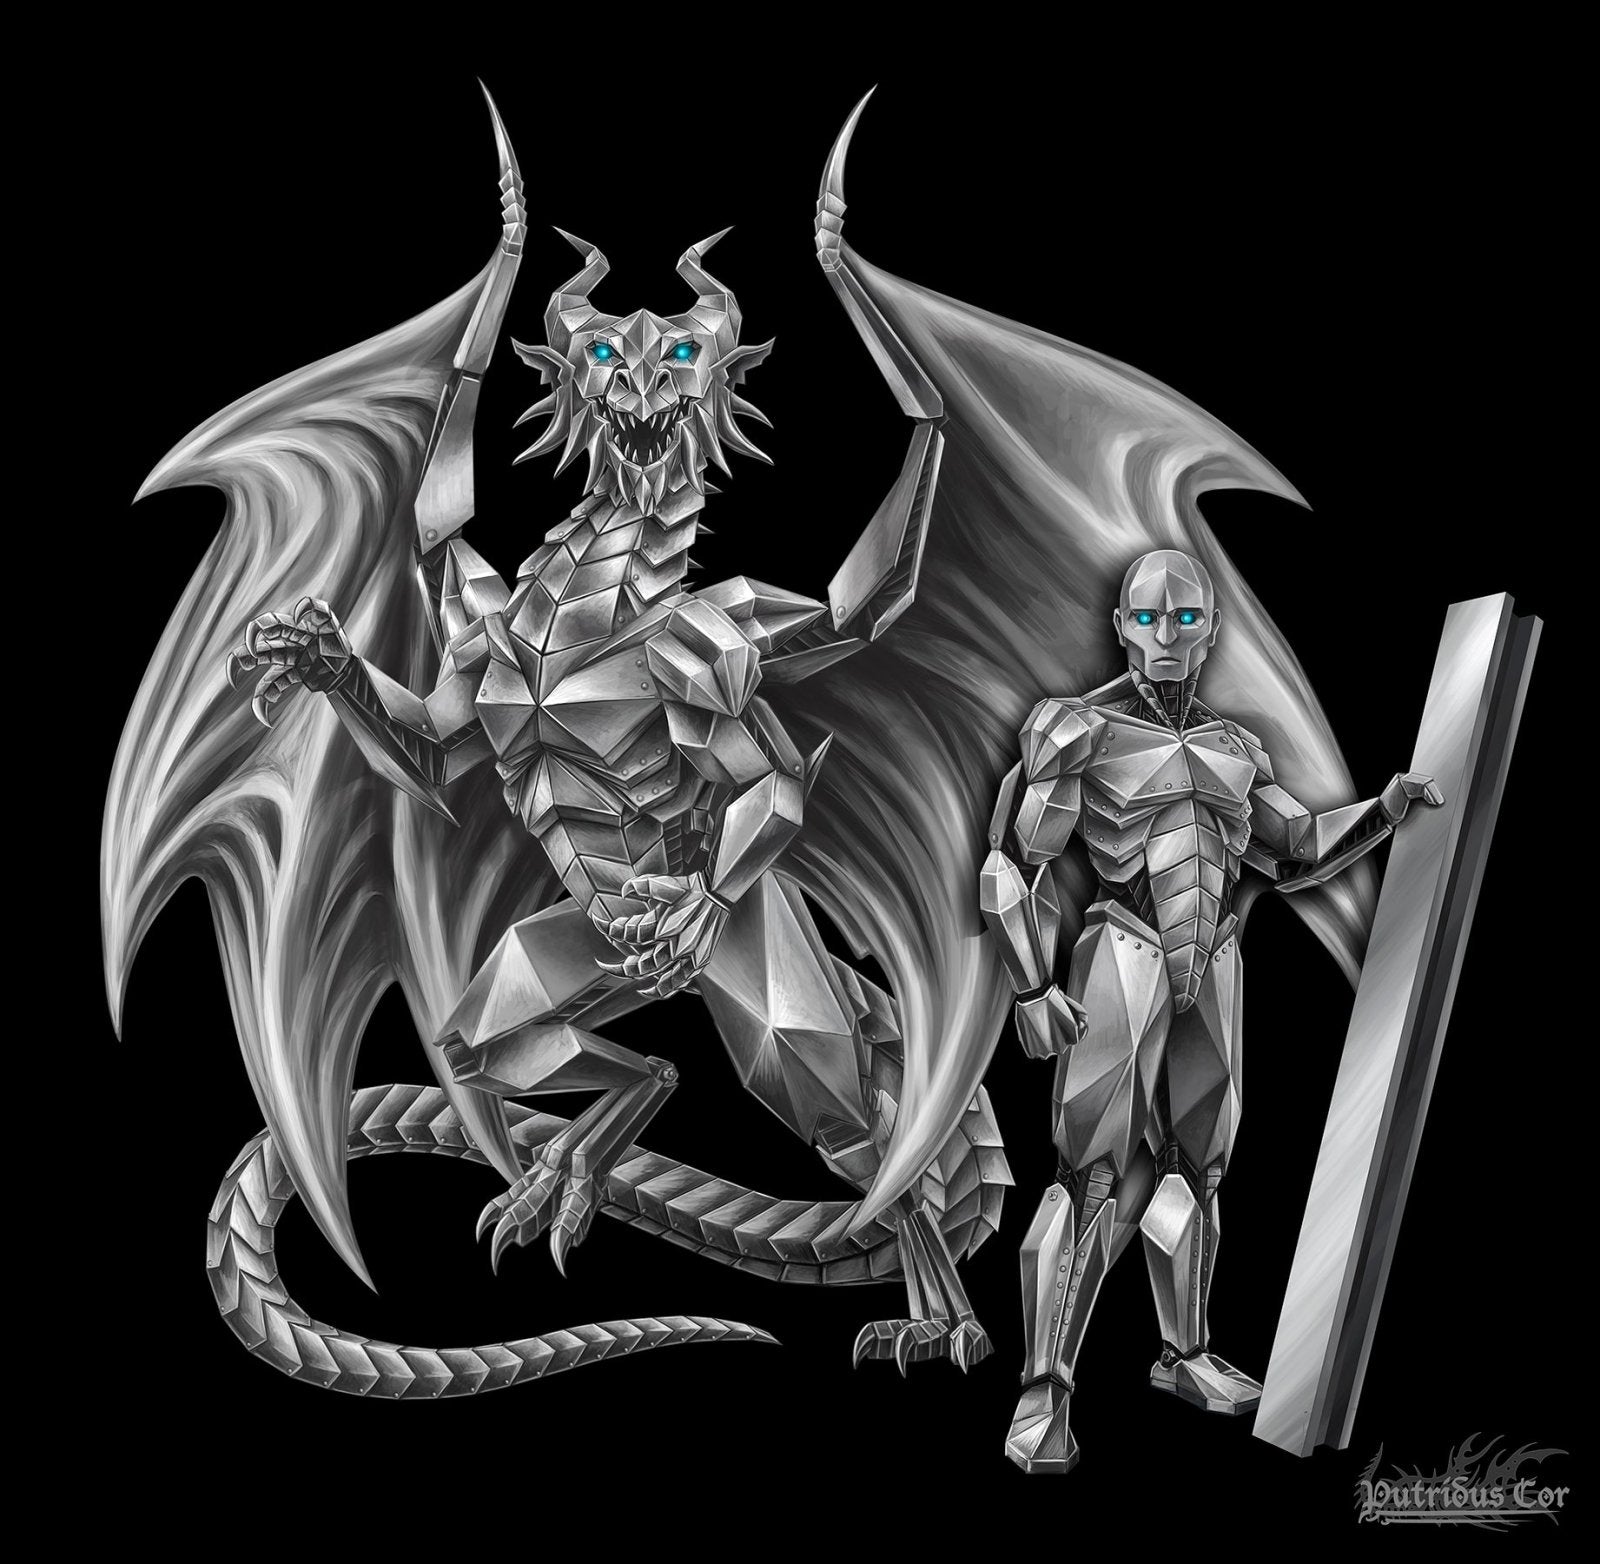 Personalized Dragon Art, Commission your own custom creature fantasy Illustration, or D&D RPG campaign images.